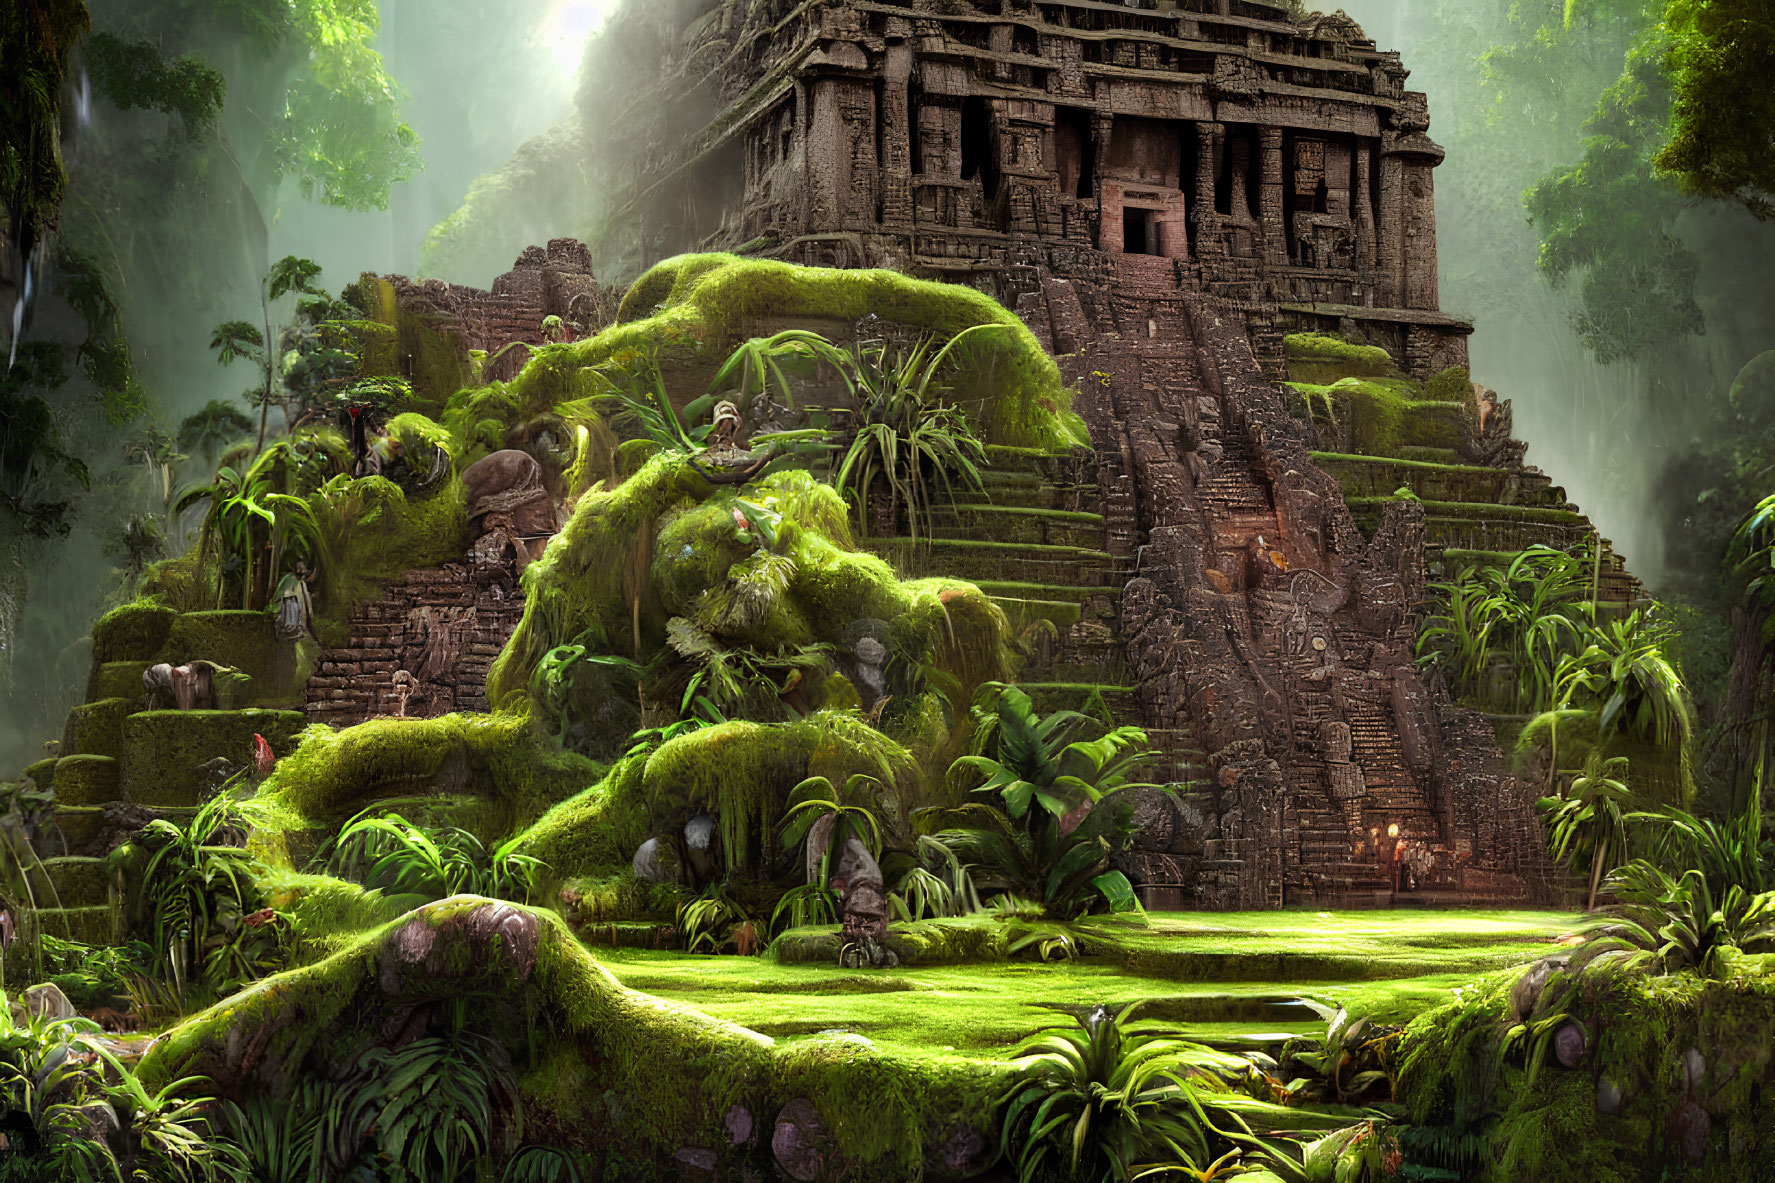 Ancient temple engulfed by lush jungle with sunlight filtering through.